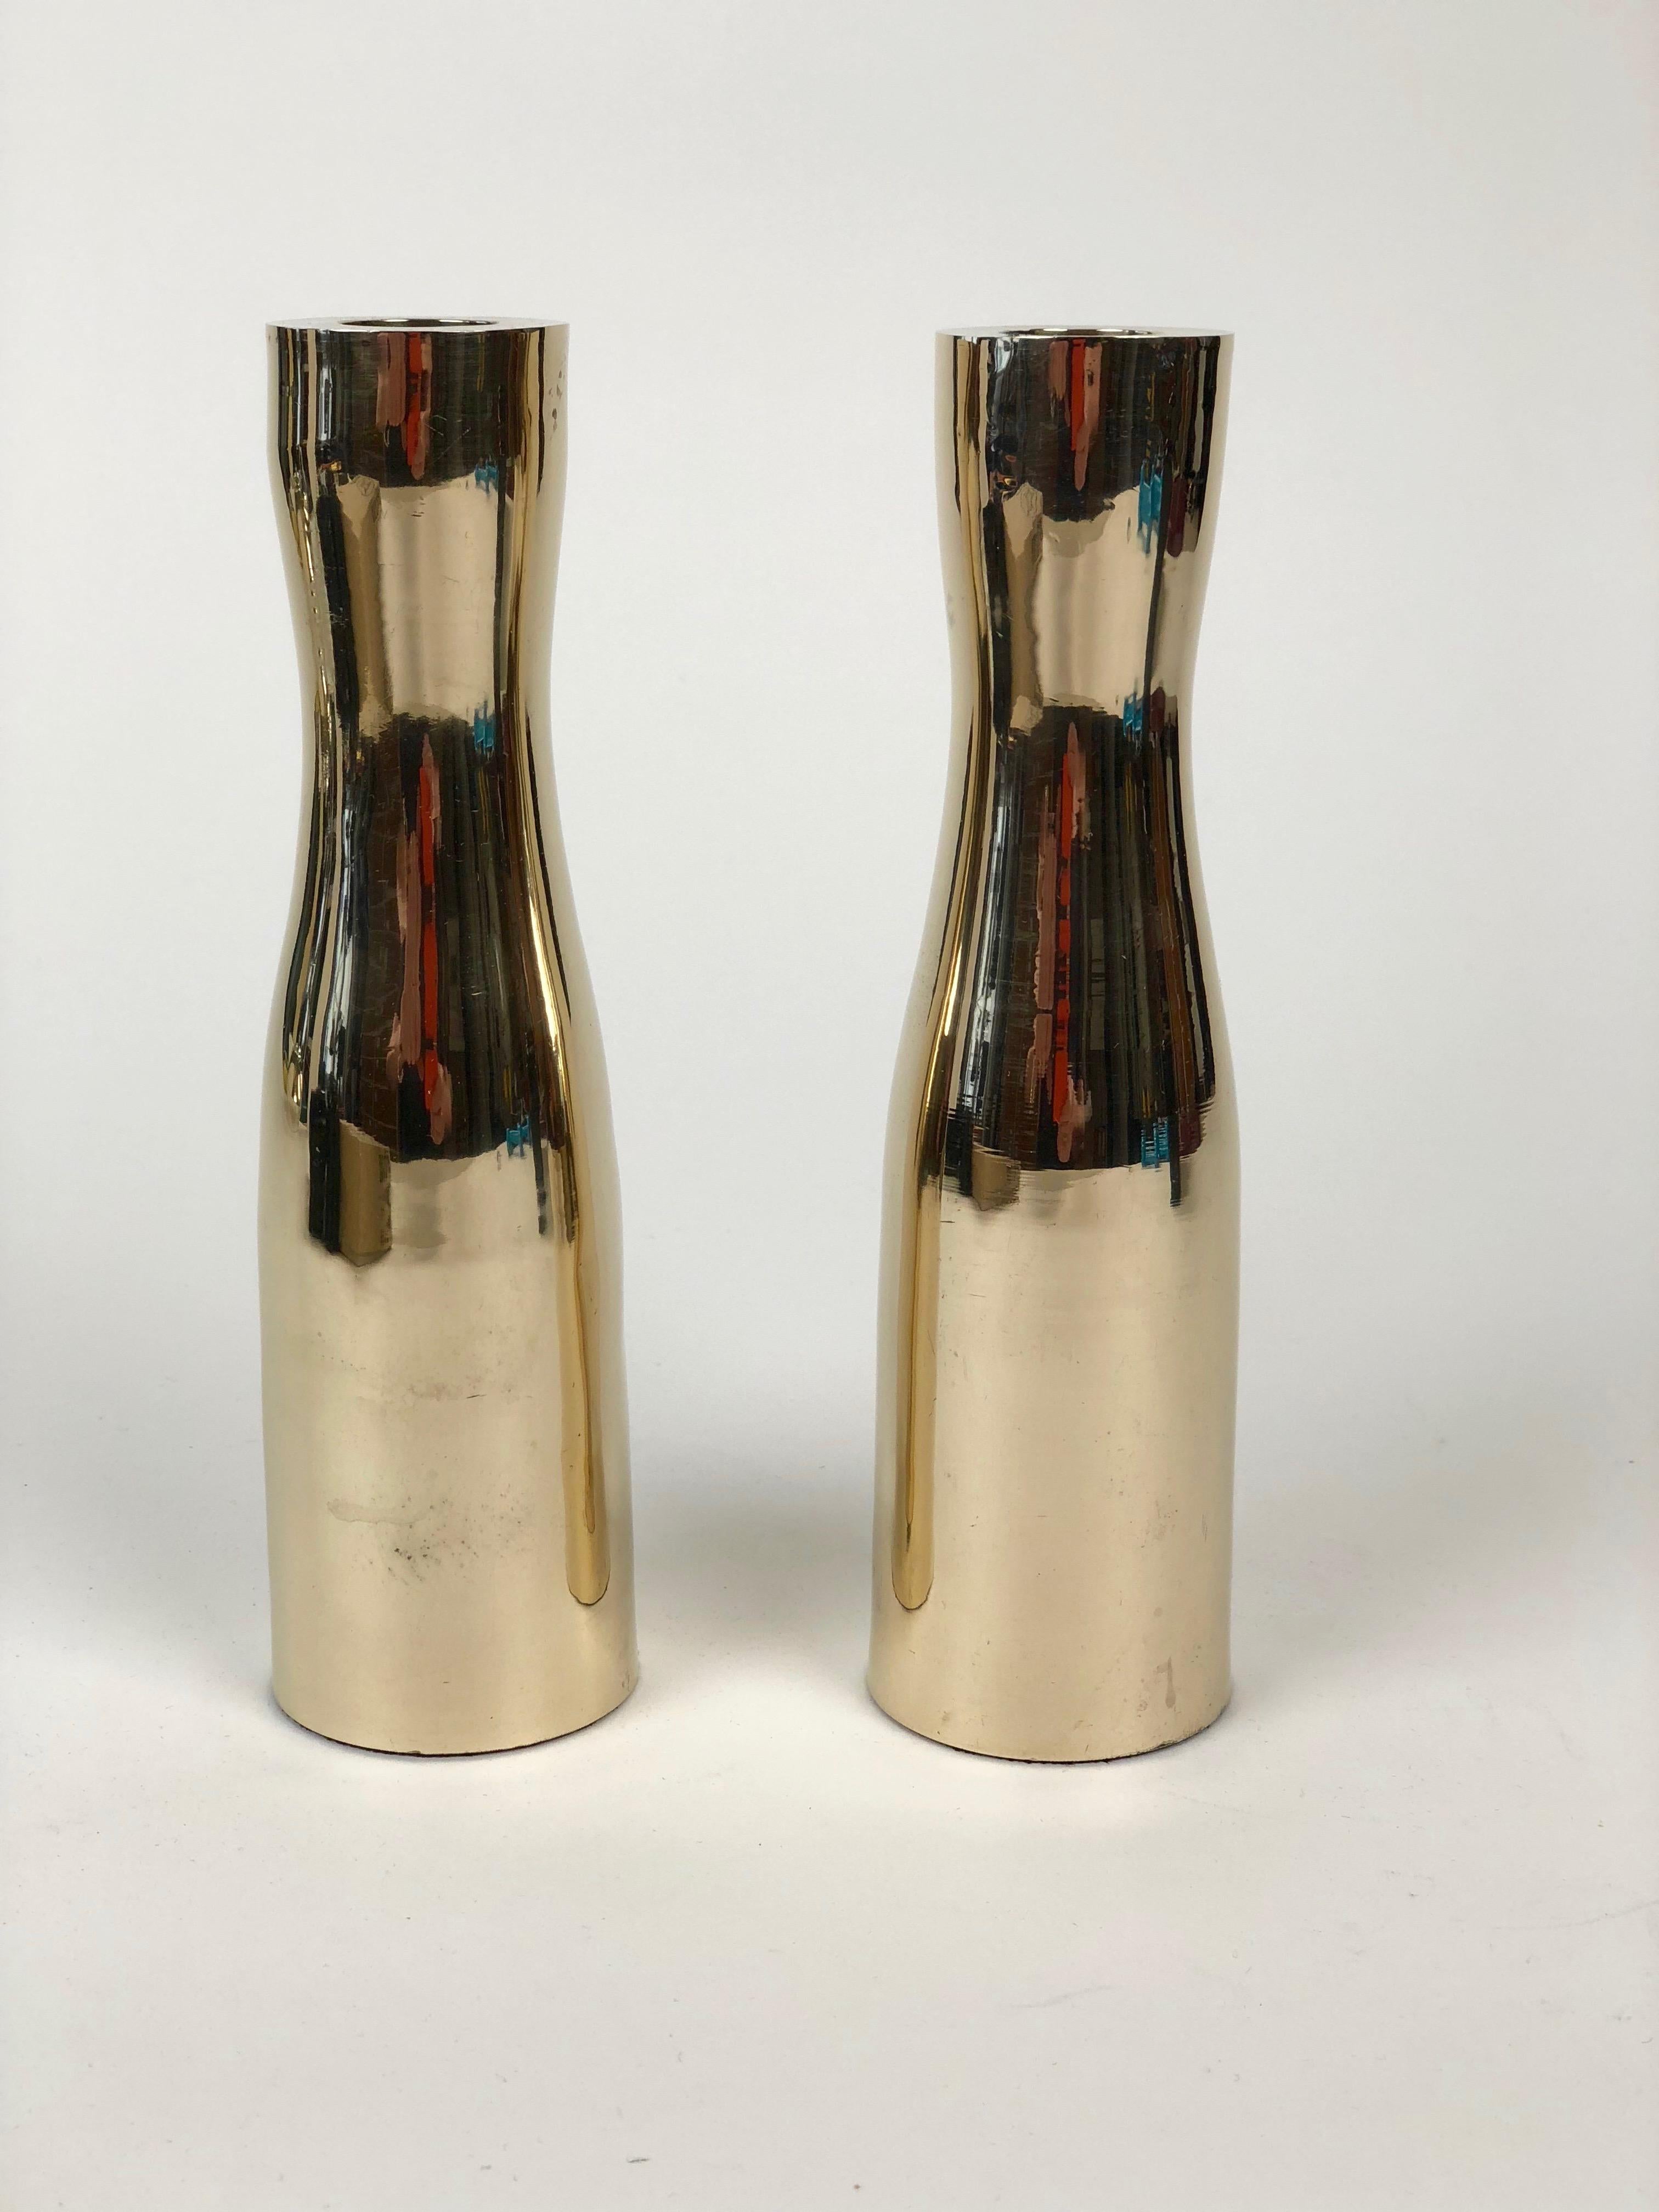 These candleholders are composed of minimalistic forms that are made in solid brass. They have been polished to a high sheen.

The candleholders were made in the 1960s and were produced in the USA. The price is for two pieces, sold as set.